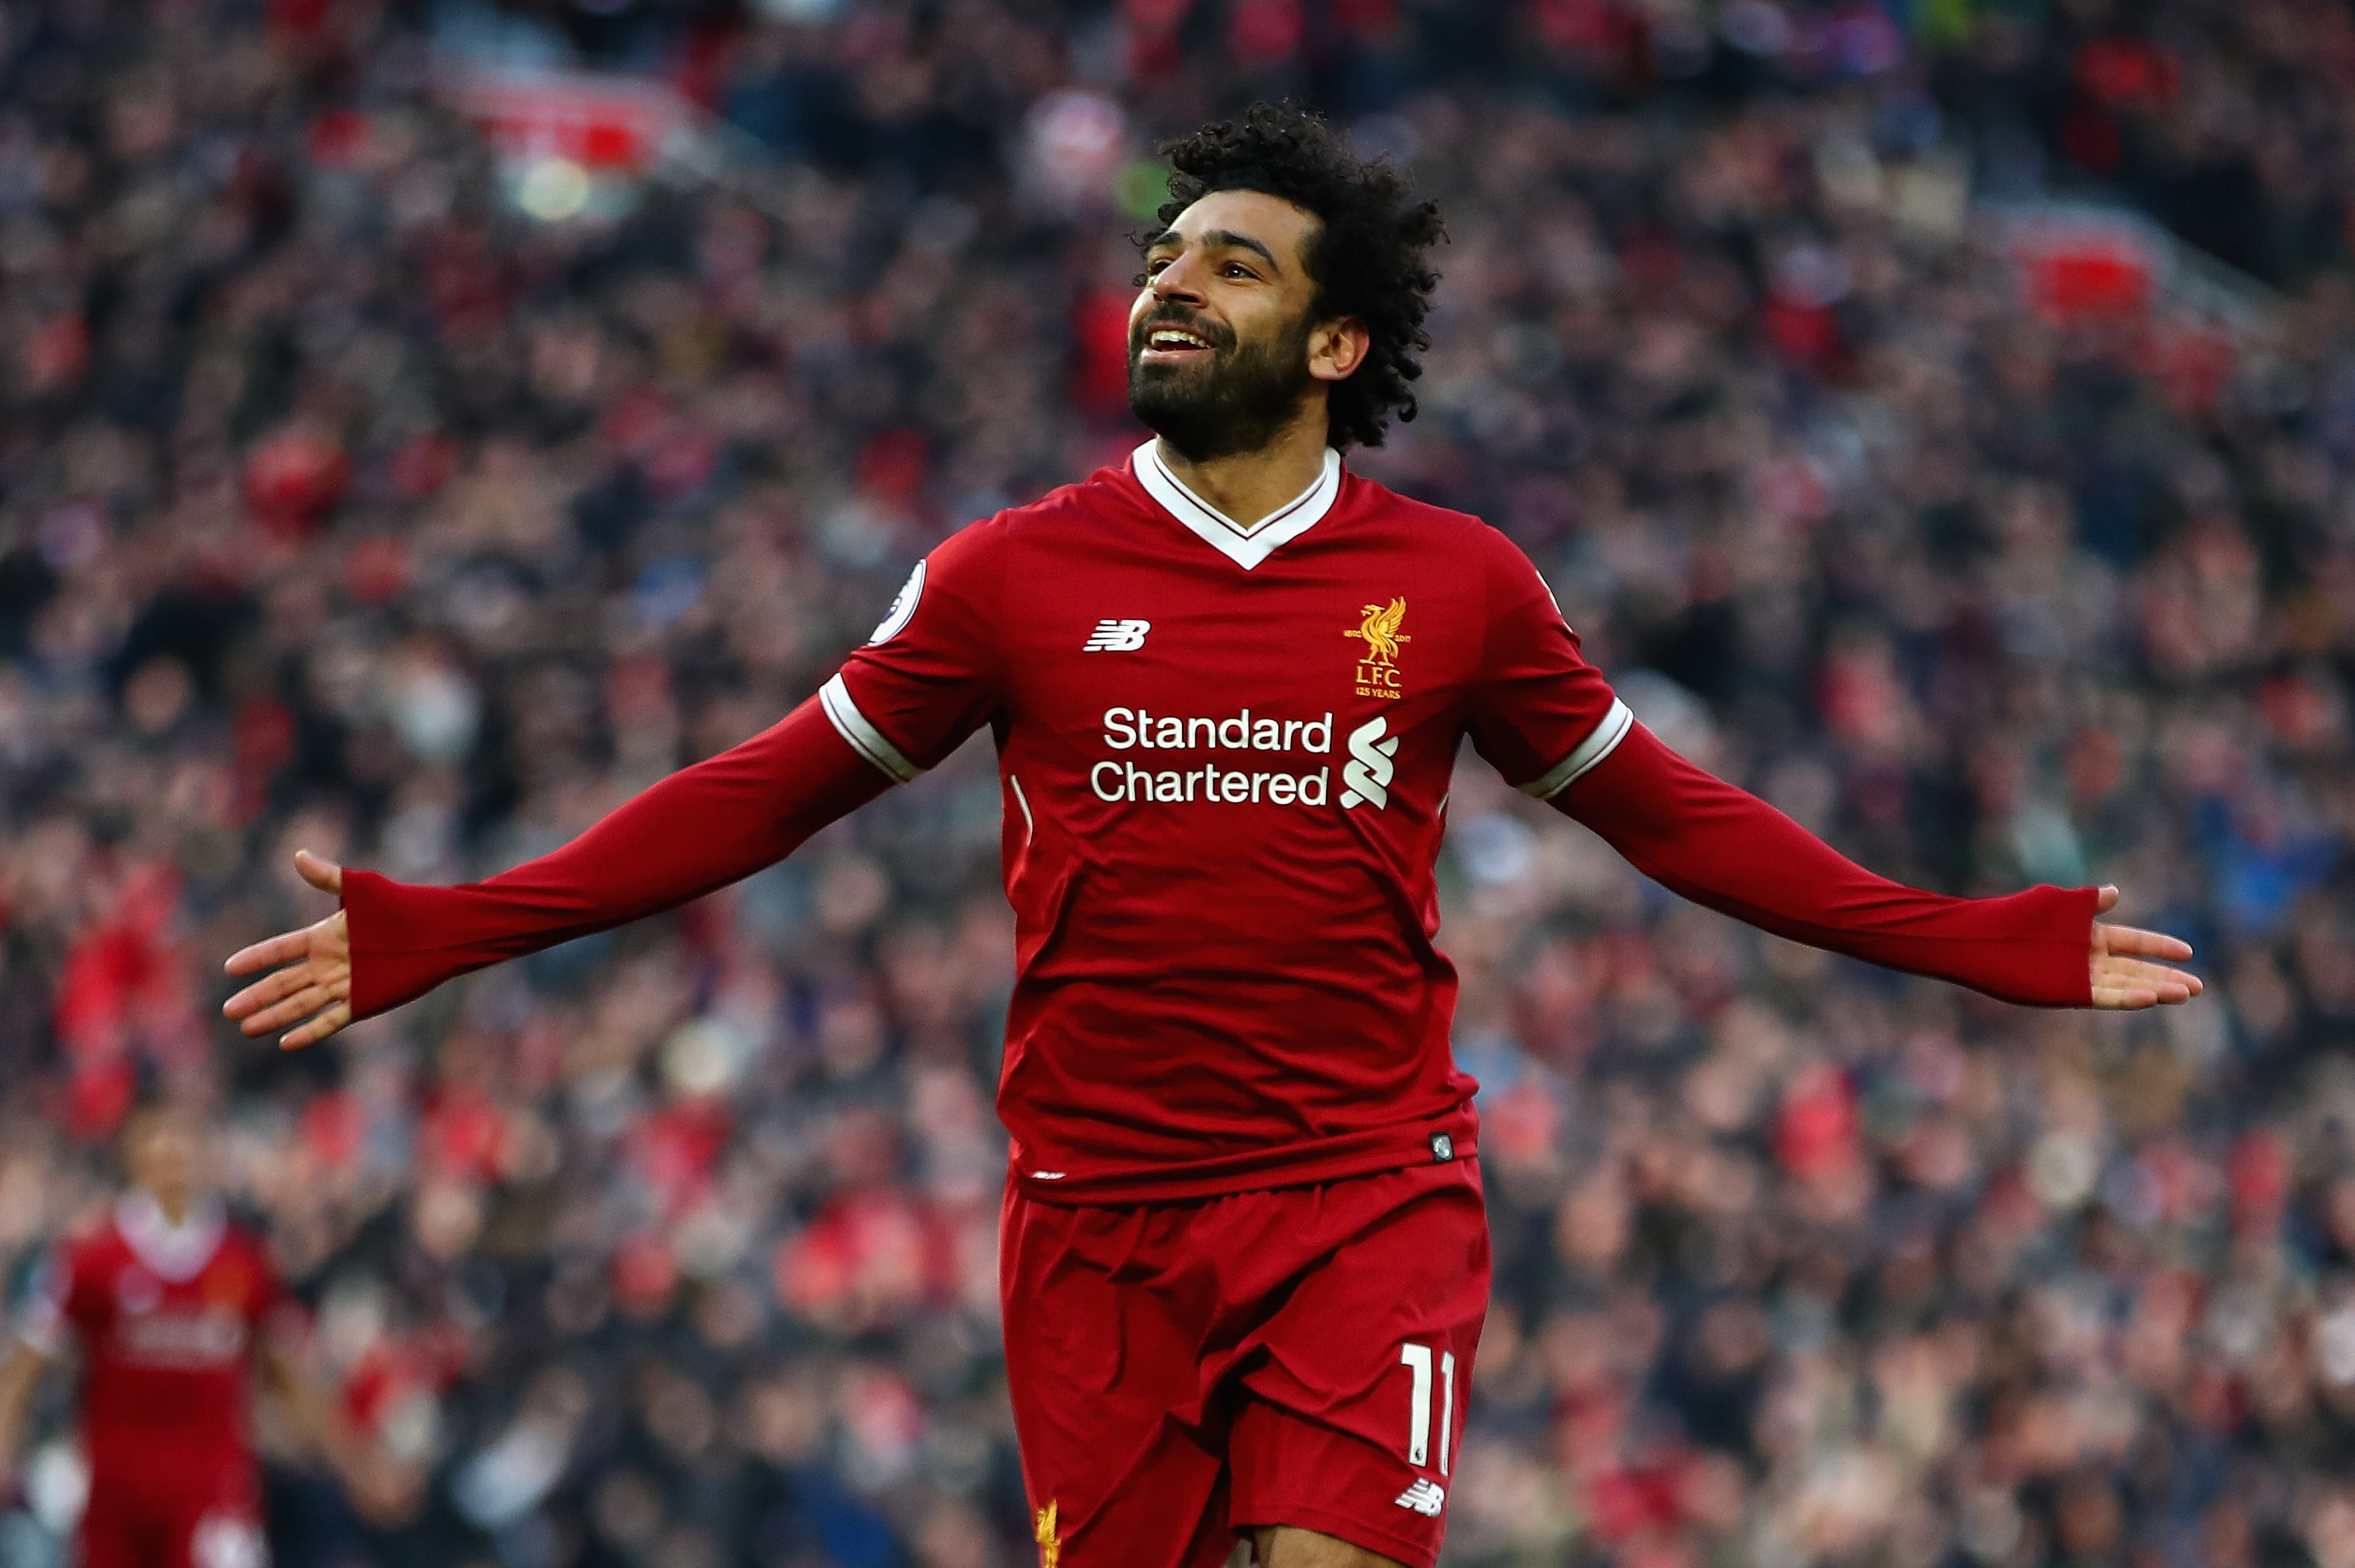 LIVERPOOL, ENGLAND - FEBRUARY 24:  Mohamed Salah of Liverpool celebrates scoring his side's second goal  during the Premier League match between Liverpool and West Ham United at Anfield on February 24, 2018 in Liverpool, England.  (Photo by Clive Brunskill/Getty Images)